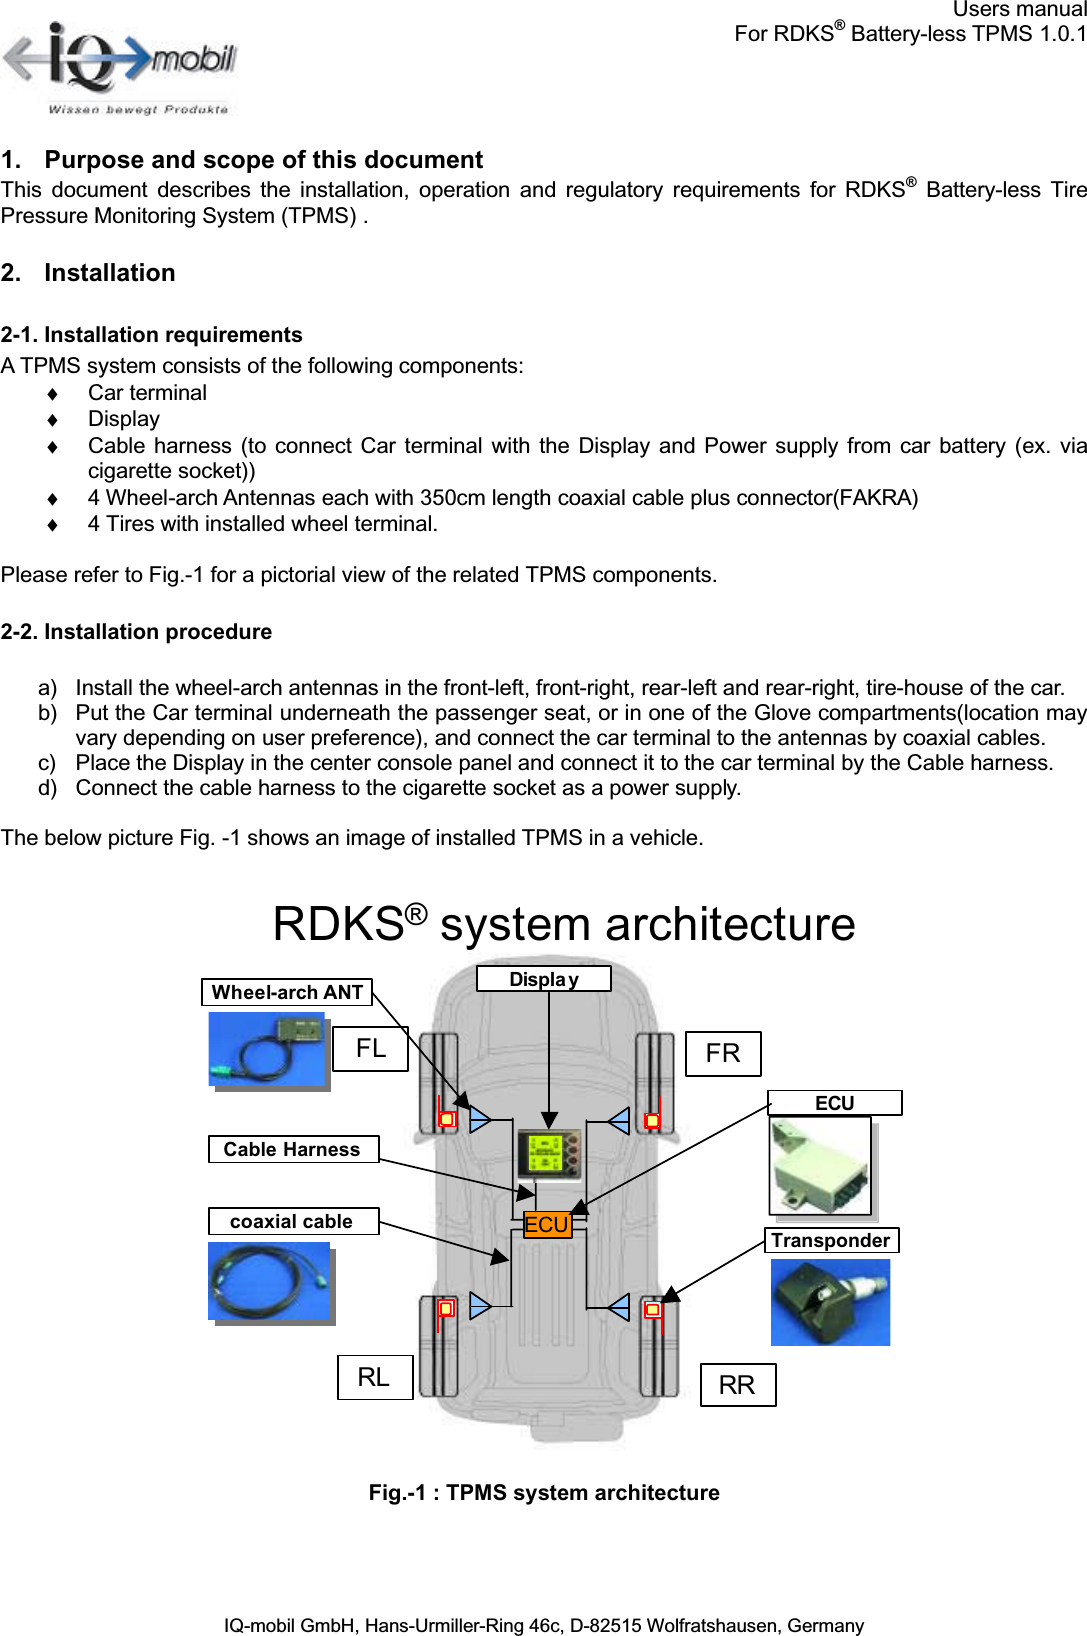 Users manualFor RDKS®Battery-less TPMS 1.0.1IQ-mobil GmbH, Hans-Urmiller-Ring 46c, D-82515 Wolfratshausen, Germany1. Purpose and scope of this documentThis  document  describes the installation,  operation  and  regulatory  requirements  for  RDKS®  Battery-less  TirePressure Monitoring System (TPMS) .2. Installation2-1. Installation requirementsA TPMS system consists of the following components:♦  Car terminal♦  Display♦  Cable  harness  (to connect Car  terminal  with  the Display  and Power  supply  from car  battery (ex.  viacigarette socket))♦  4 Wheel-arch Antennas each with 350cm length coaxial cable plus connector(FAKRA)♦  4 Tires with installed wheel terminal.Please refer to Fig.-1 for a pictorial view of the related TPMS components.2-2. Installation procedurea) Install the wheel-arch antennas in the front-left, front-right, rear-left and rear-right, tire-house of the car.b) Put the Car terminal underneath the passenger seat, or in one of the Glove compartments(location may vary depending on user preference), and connect the car terminal to the antennas by coaxial cables.c) Place the Display in the center console panel and connect it to the car terminal by the Cable harness.d) Connect the cable harness to the cigarette socket as a power supply.The below picture Fig. -1 shows an image of installed TPMS in a vehicle.Fig.-1 : TPMS system architectureRDKS®system architectureFRFLRL RRECU TransponderDispla yWheel-arch ANTcoaxial cable ECUCable Harness 